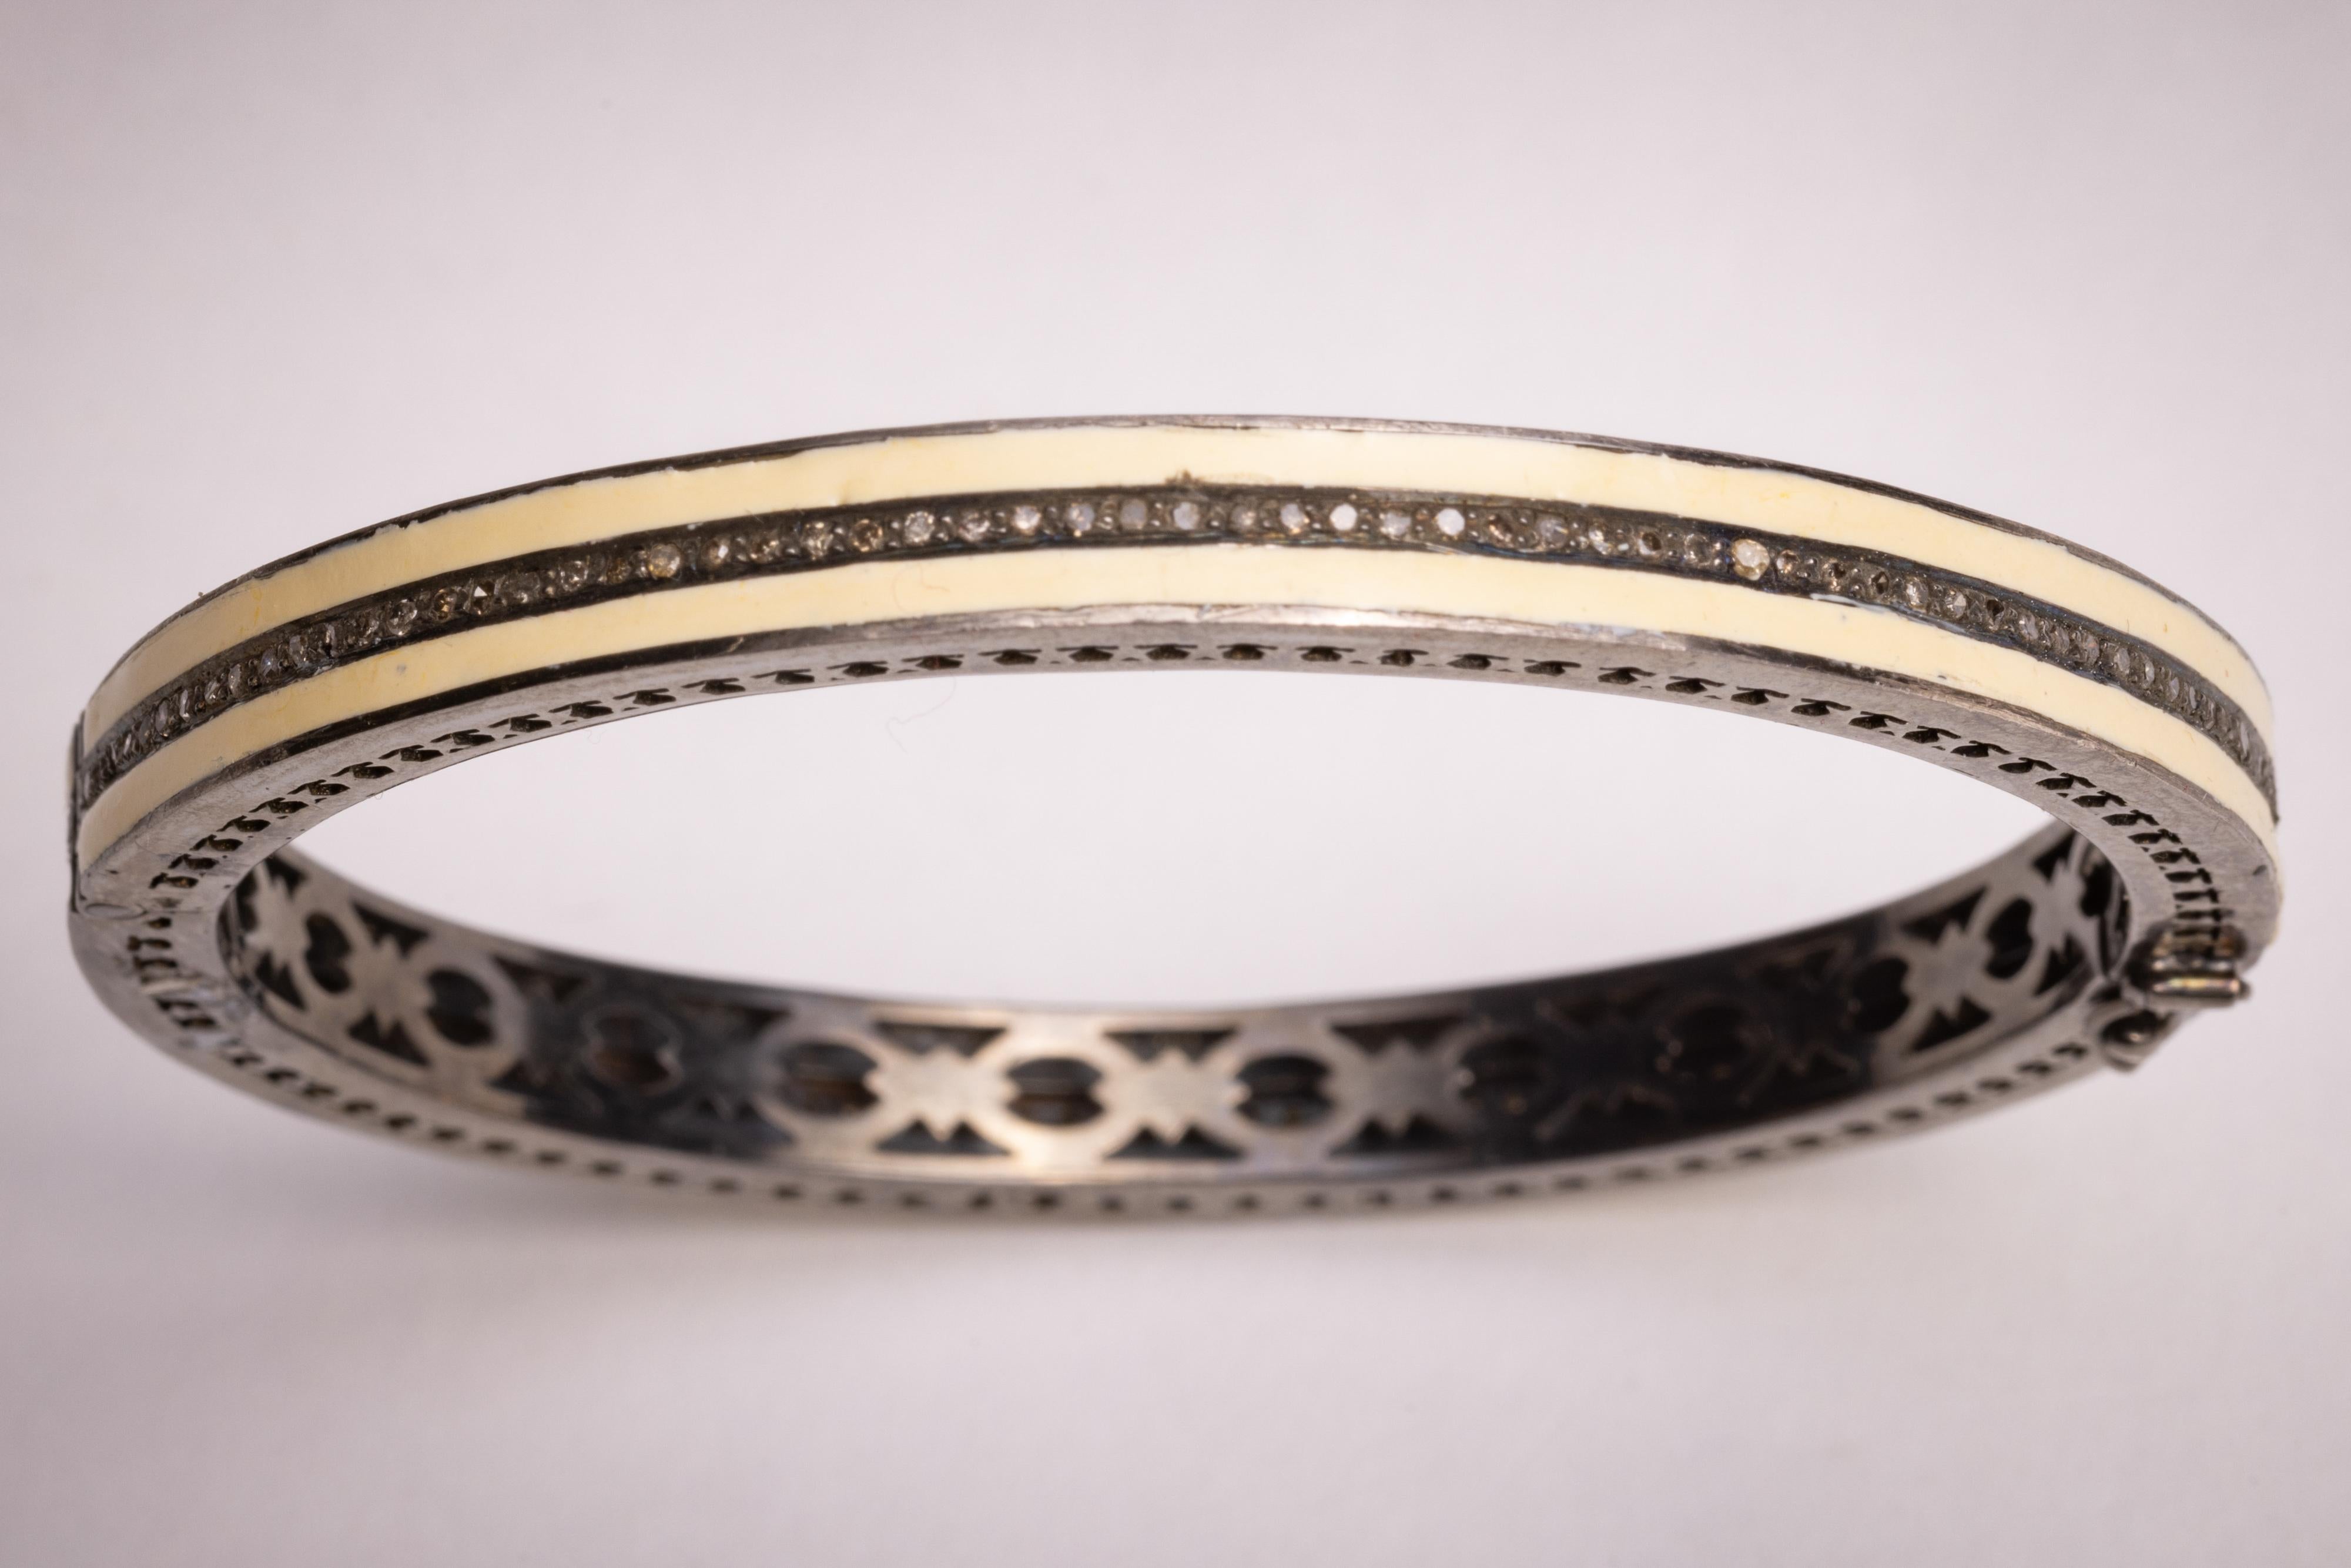 A white enamel and sterling silver bangle bracelet with a line of round, brilliant cut diamonds set down the middle.  Inside circumference is 7